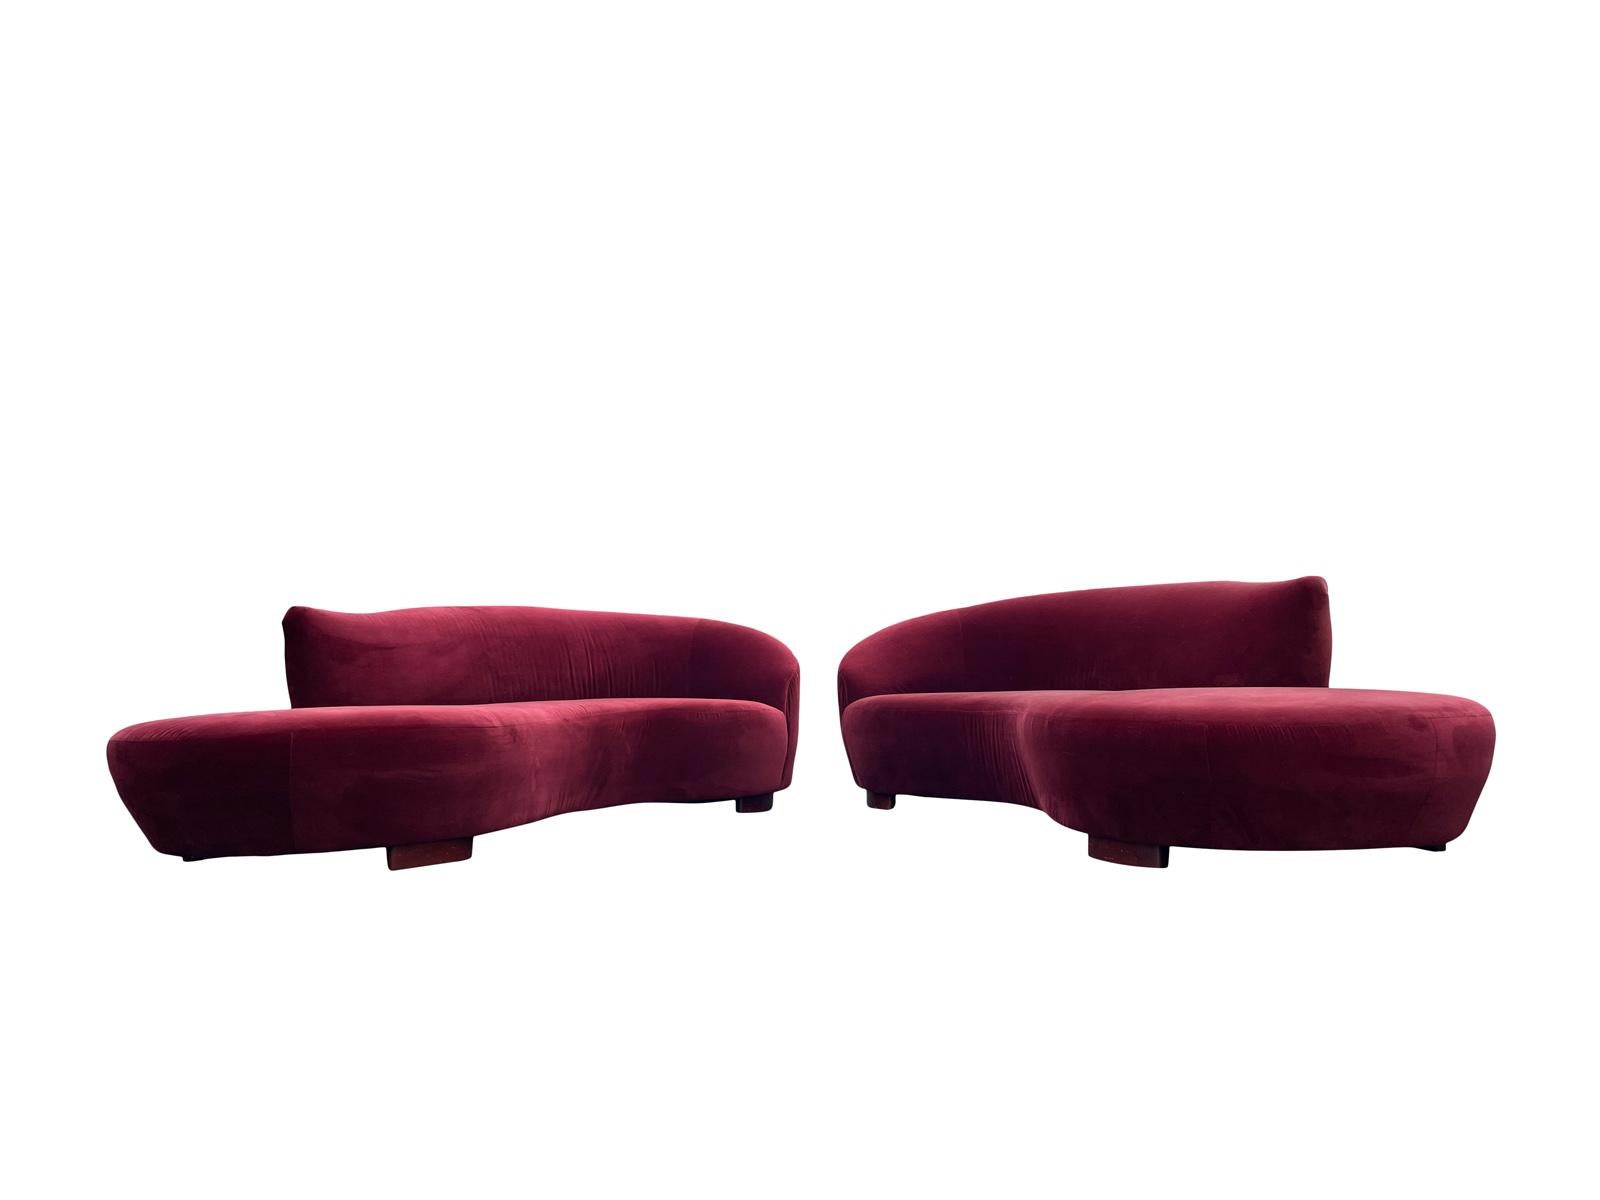 Burgundy Red Velvet Asymmetrical Cloud Sofa Set by Weiman  In Good Condition For Sale In Bensalem, PA